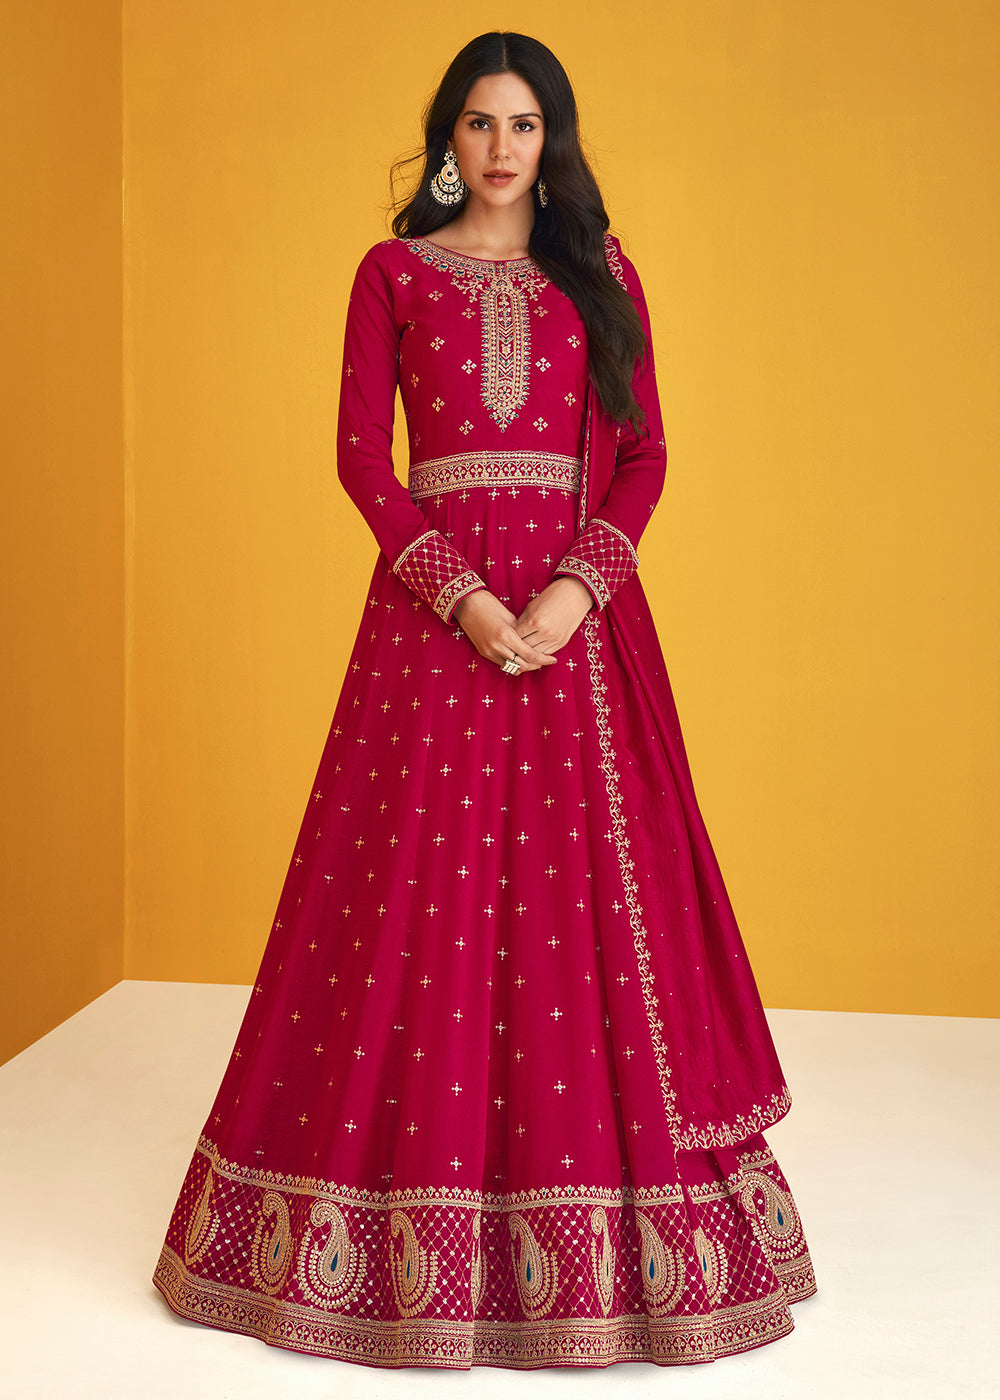 Shop Now Glamourous Hot Pink Silk Festive Anarkali Suit Online featuring Sonam Bajwa at Empress Clothing in USA.